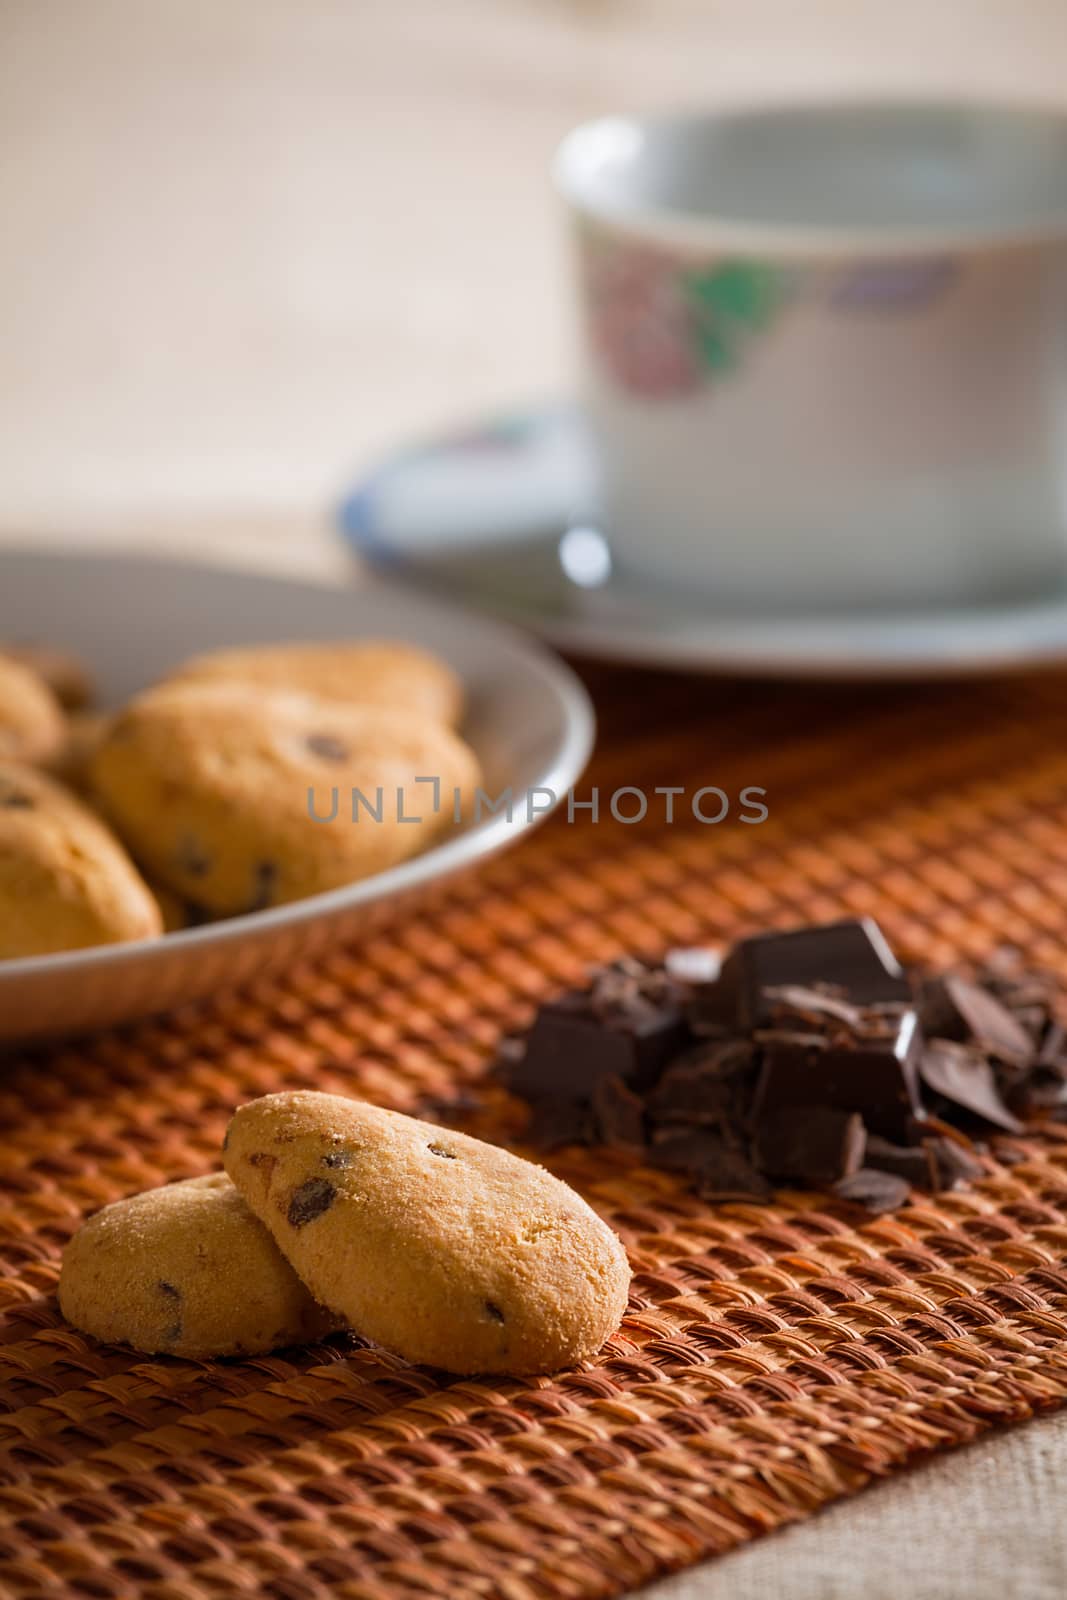 Cookies with chocolate chips